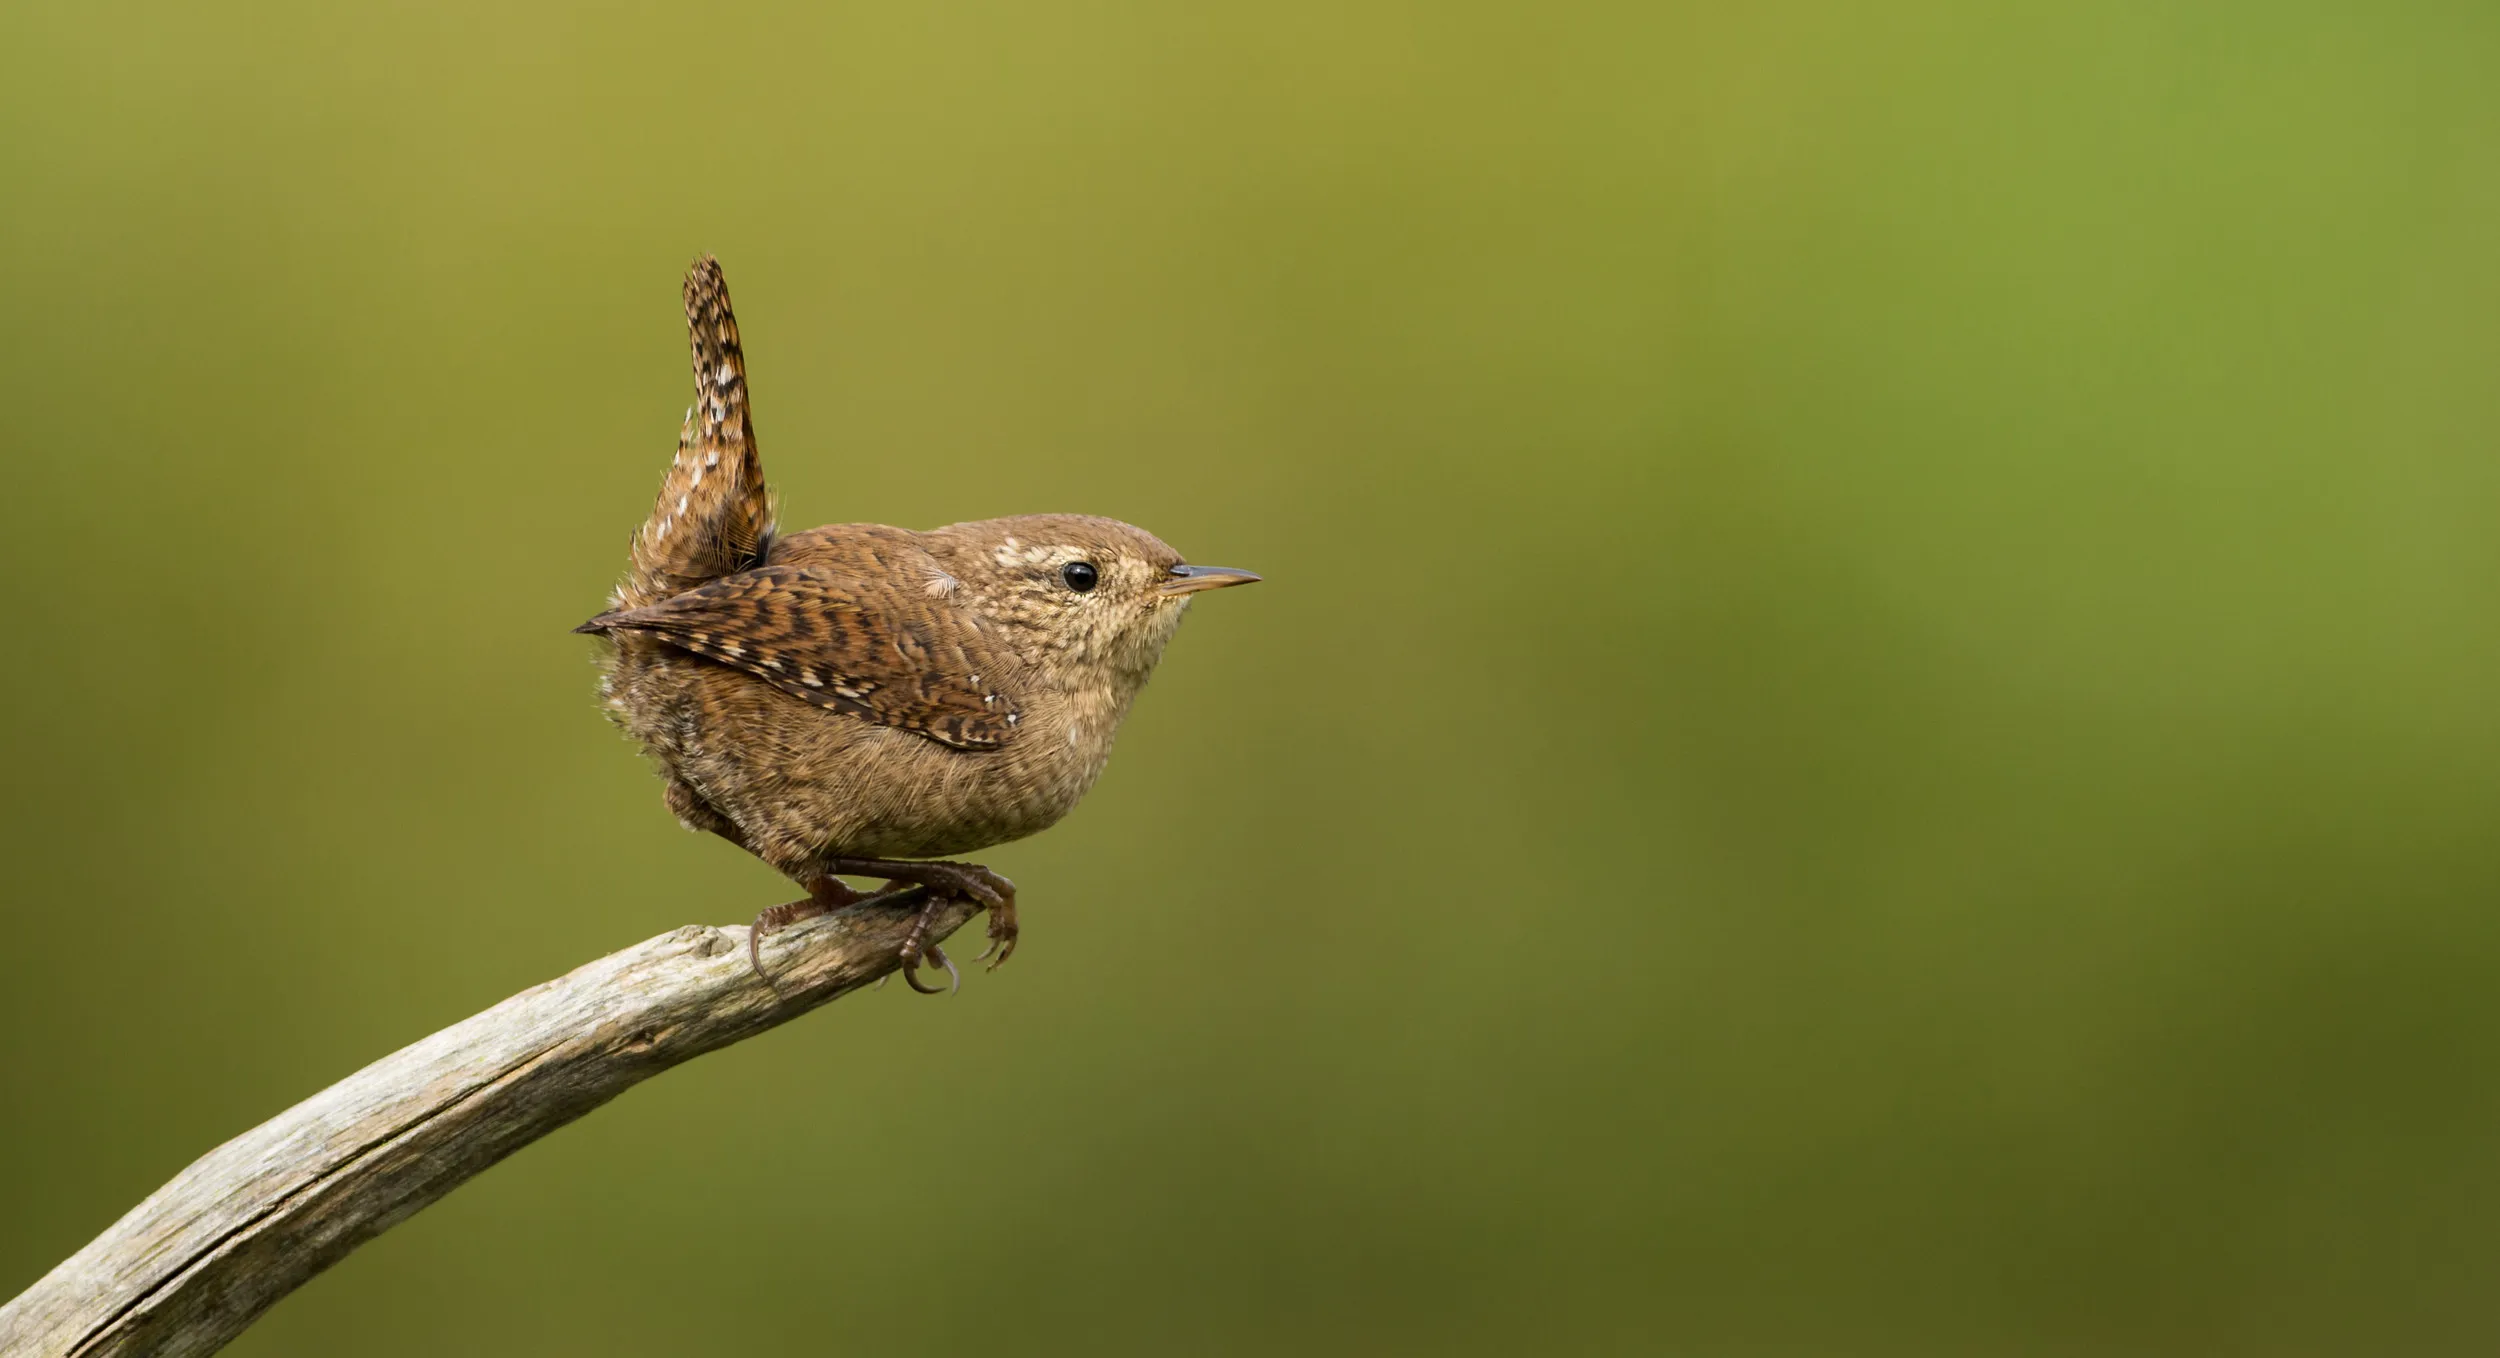 A Wren perched on the very end of a twig, looking to fly off.